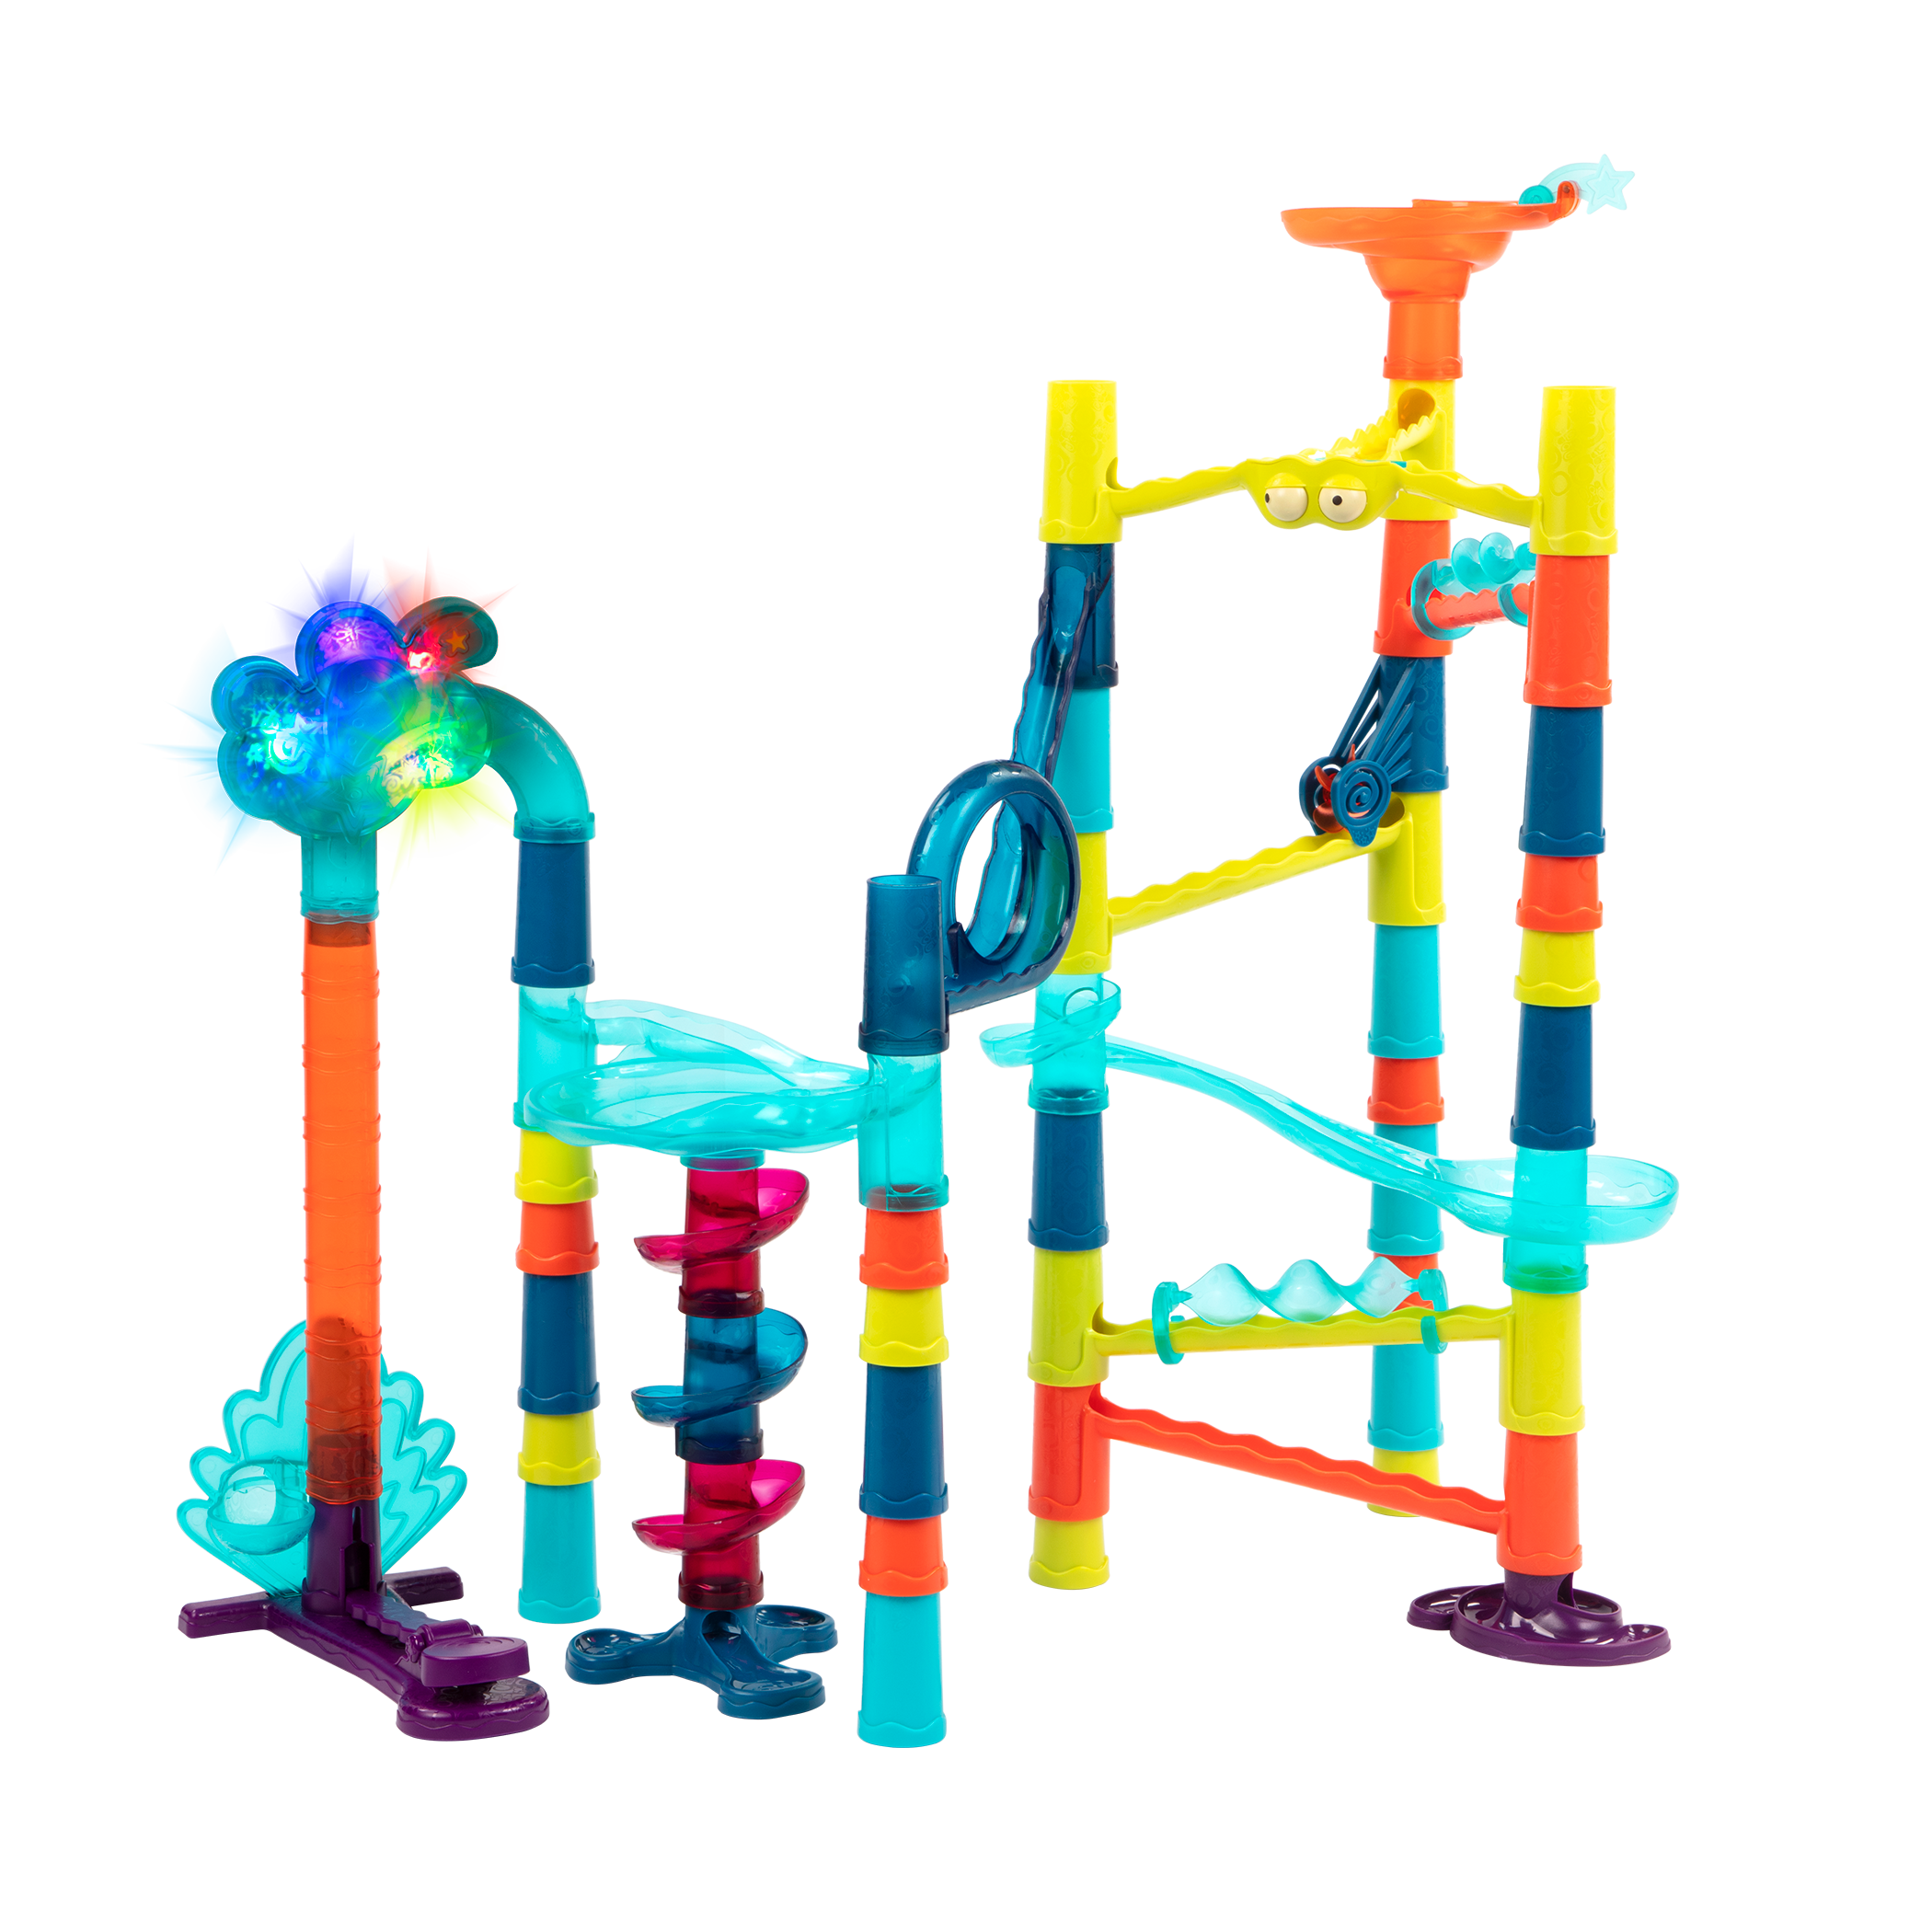 Marble-palooza Deluxe - 62 Pieces, Marble Run Set